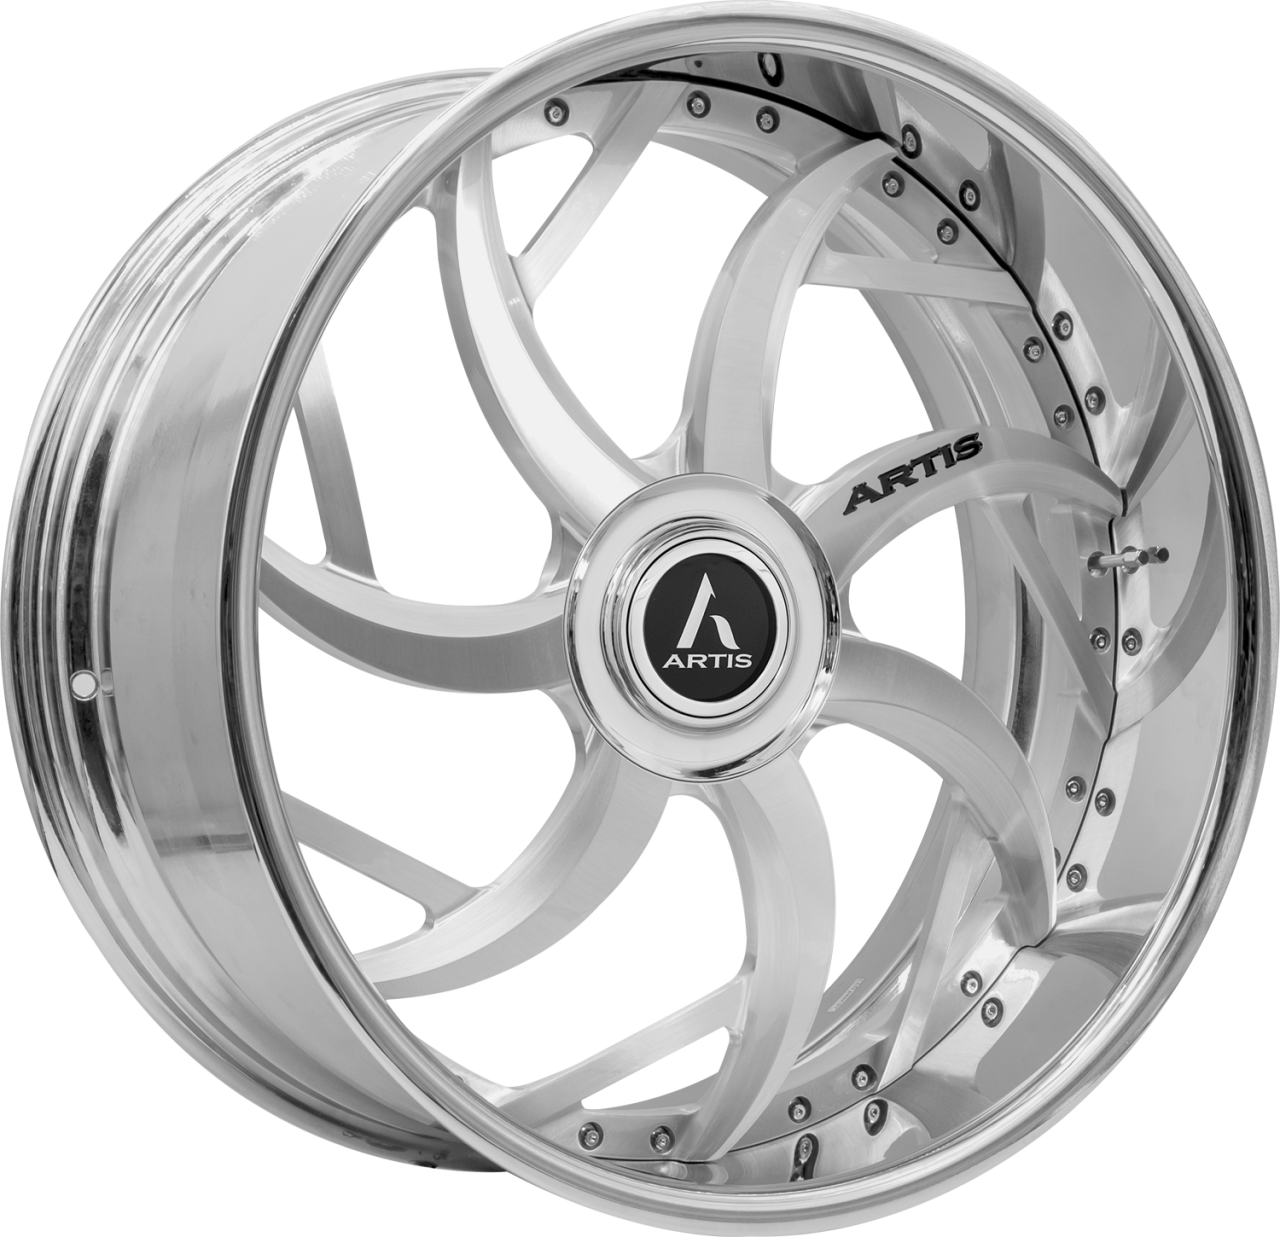 Artis Forged Sin City wheel with Brushed with XL Floater Cap finish